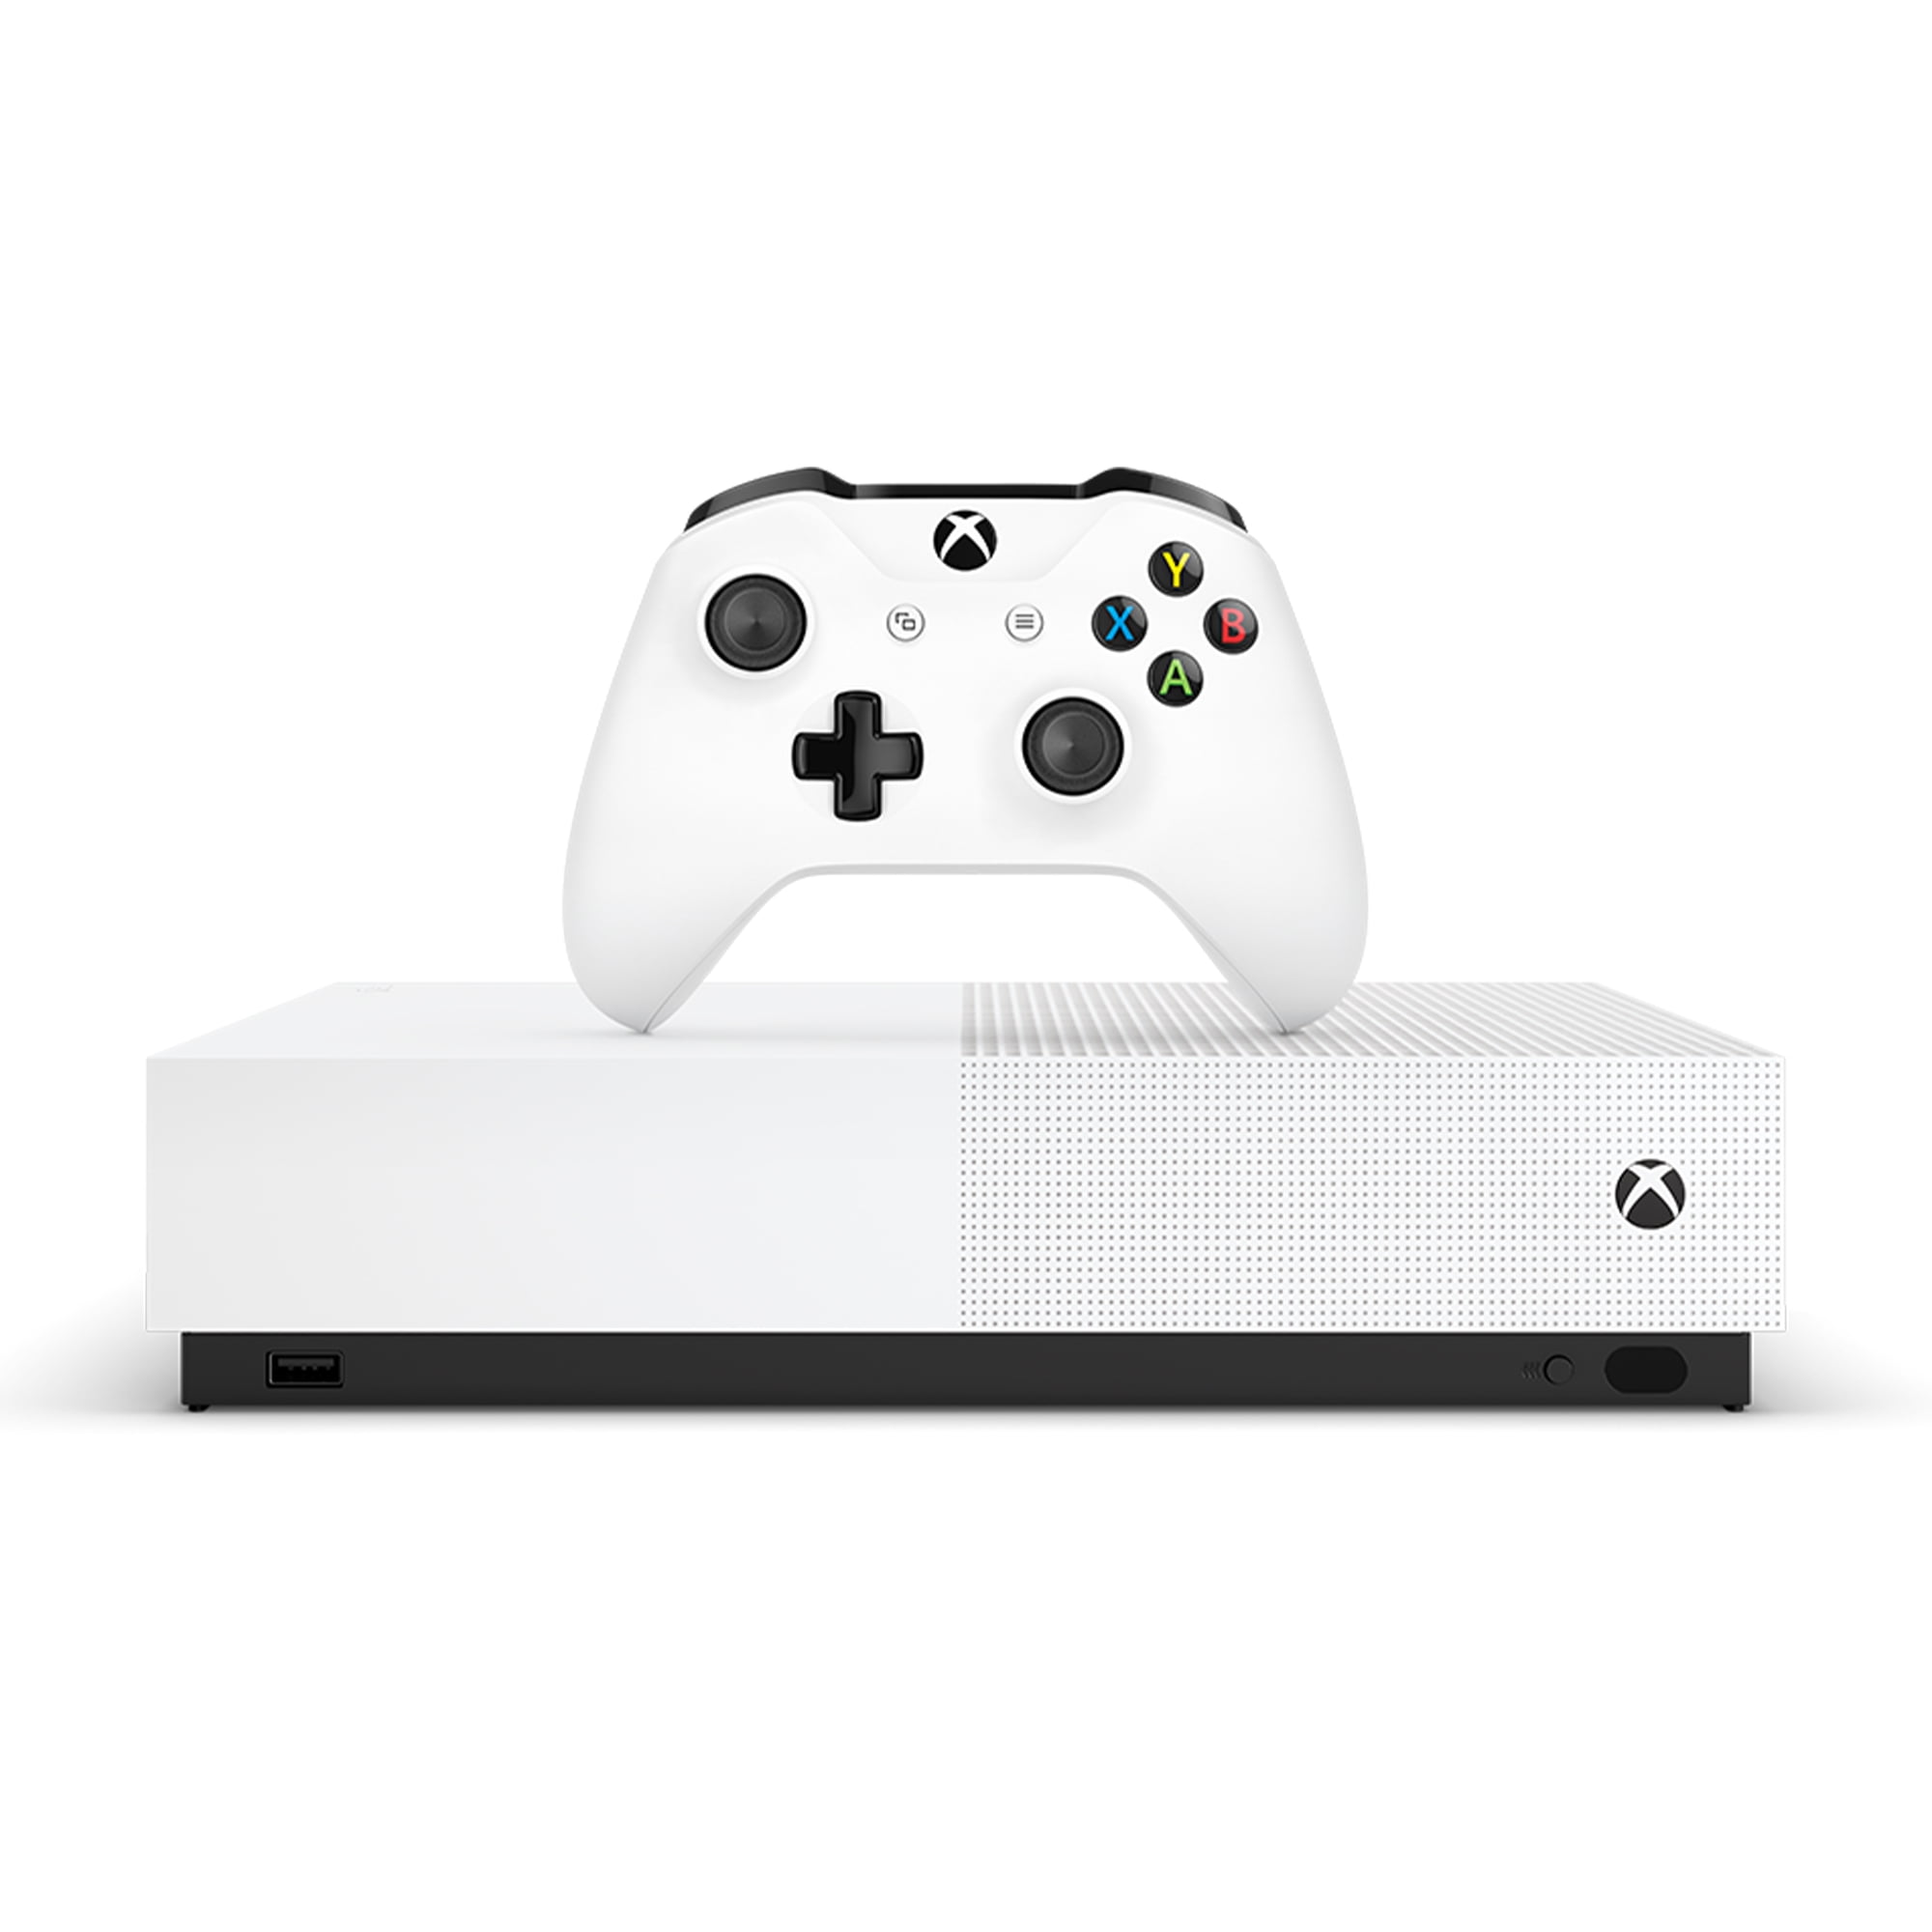 Xbox One S All-Digital Edition vs. Xbox One X: Comparison and buying advice  for Microsoft's game consoles - CNET